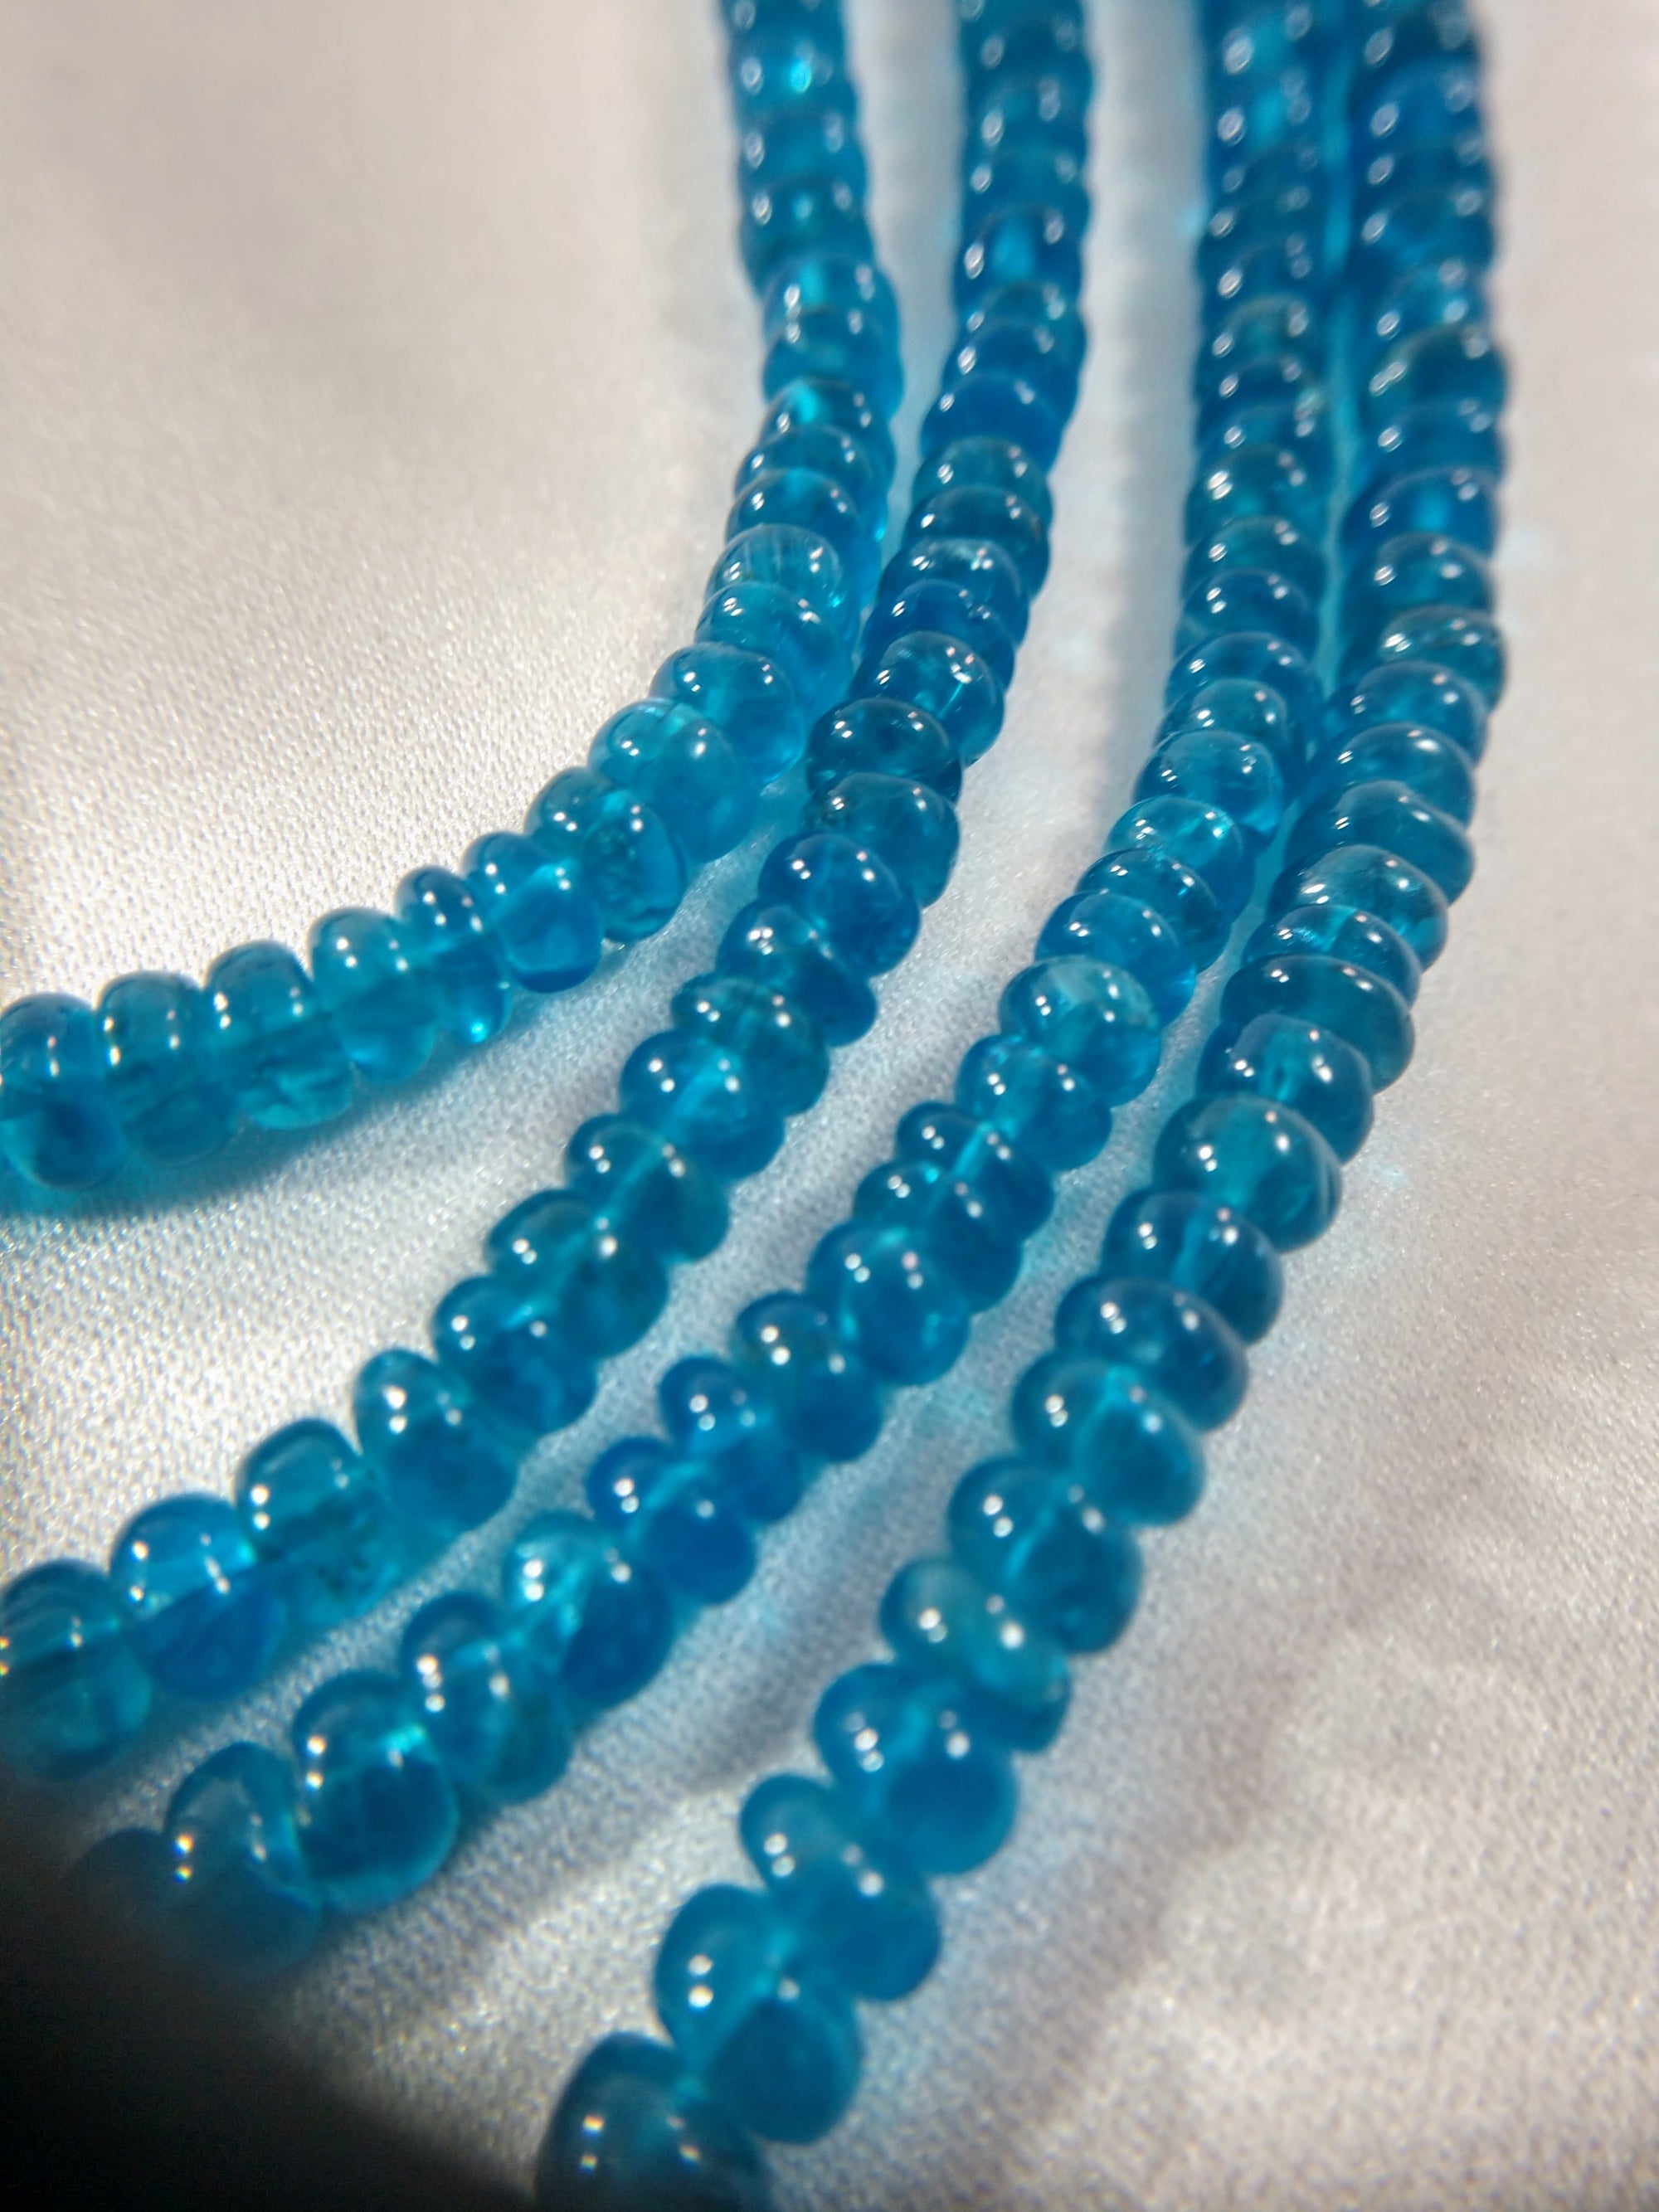 Faceted Apatite Beaded Necklace